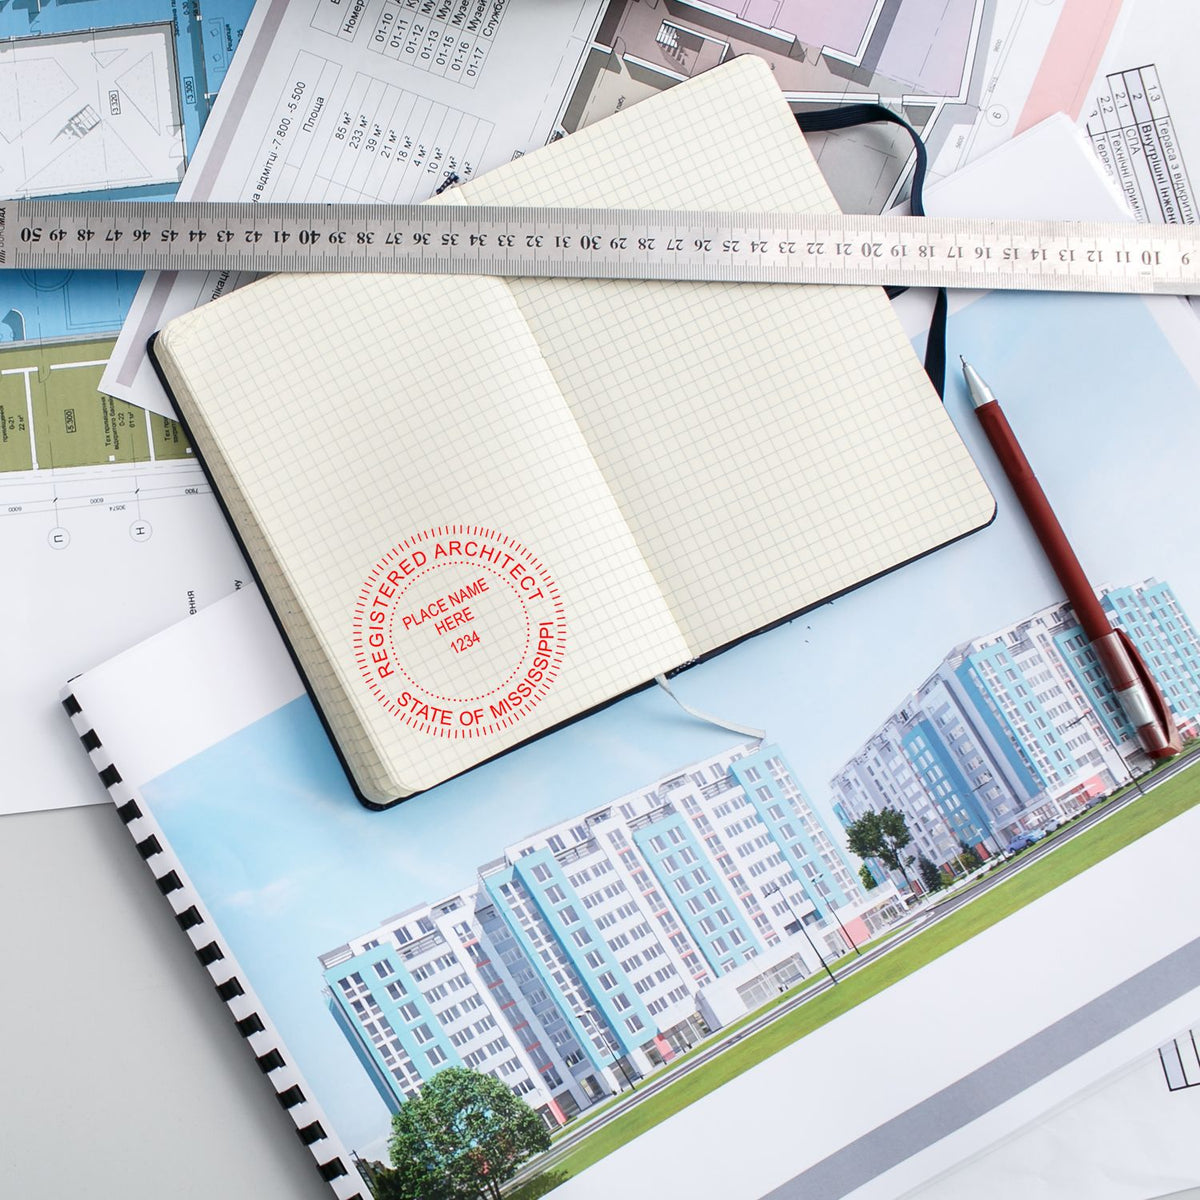 The Slim Pre-Inked Mississippi Architect Seal Stamp stamp impression comes to life with a crisp, detailed photo on paper - showcasing true professional quality.